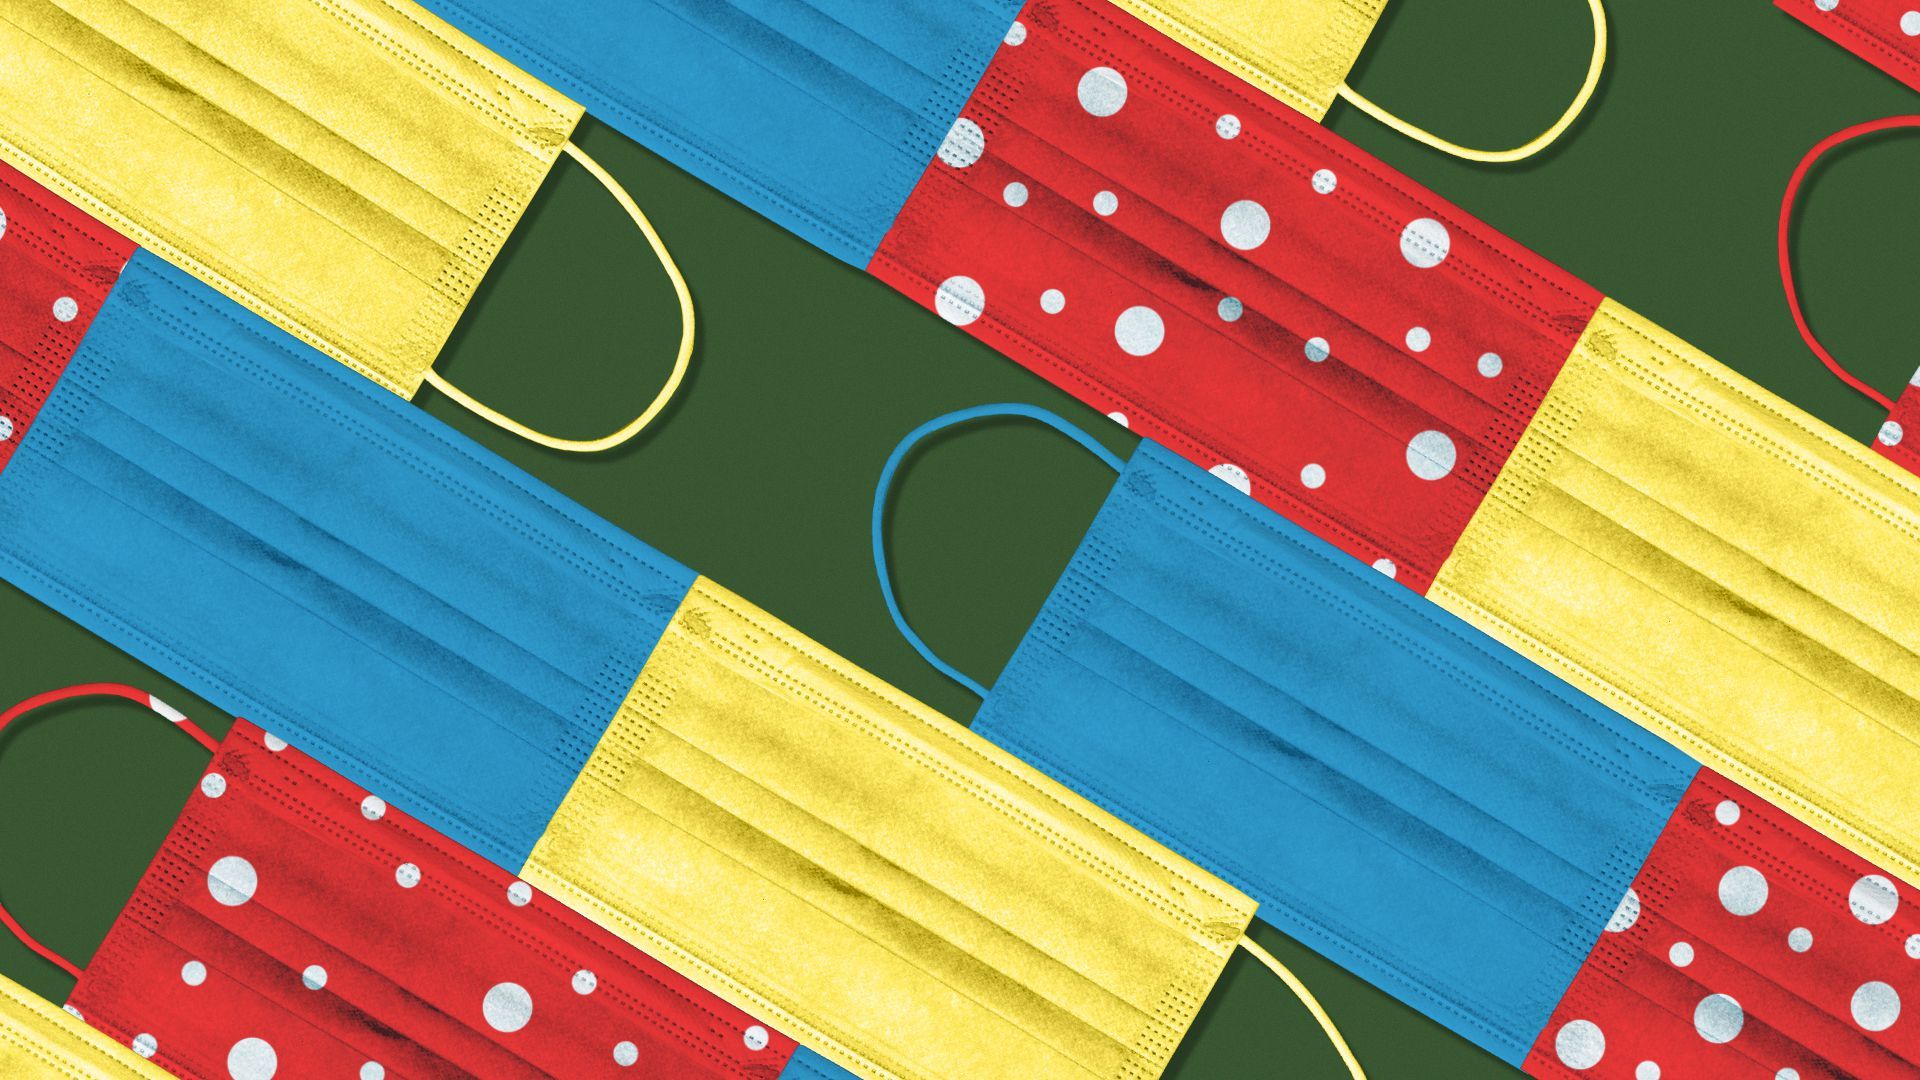 Illustration of a patchwork quilt pattern made from brightly colored children's masks. The quilt has several missing masks that leave holes in the pattern.